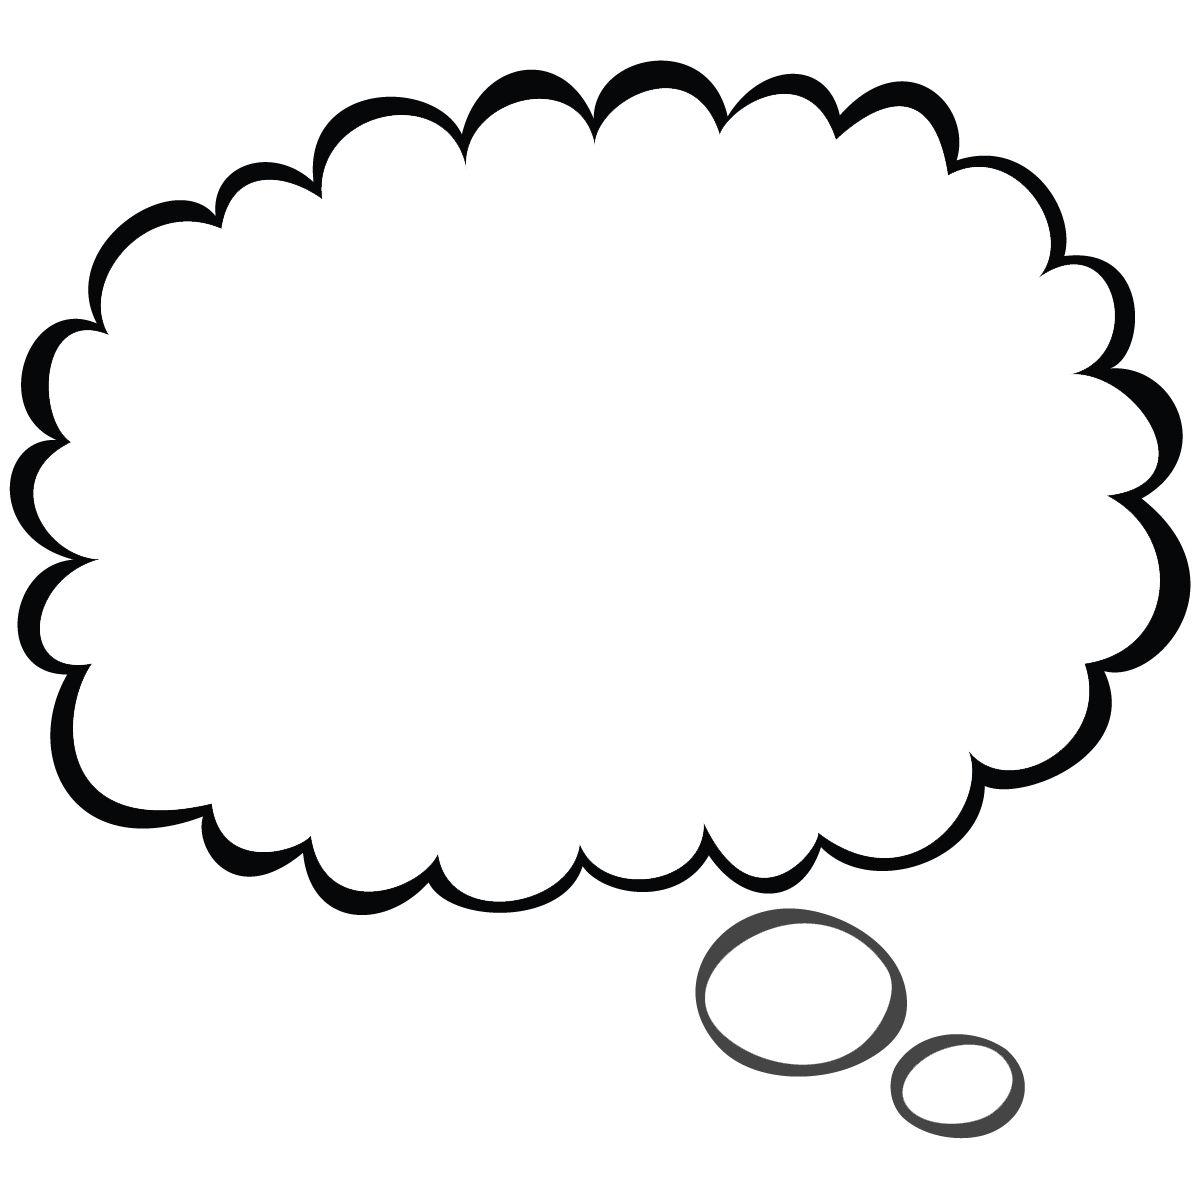 Thought Bubble Free Download Png - Kid With Thought Bubble, Transparent background PNG HD thumbnail